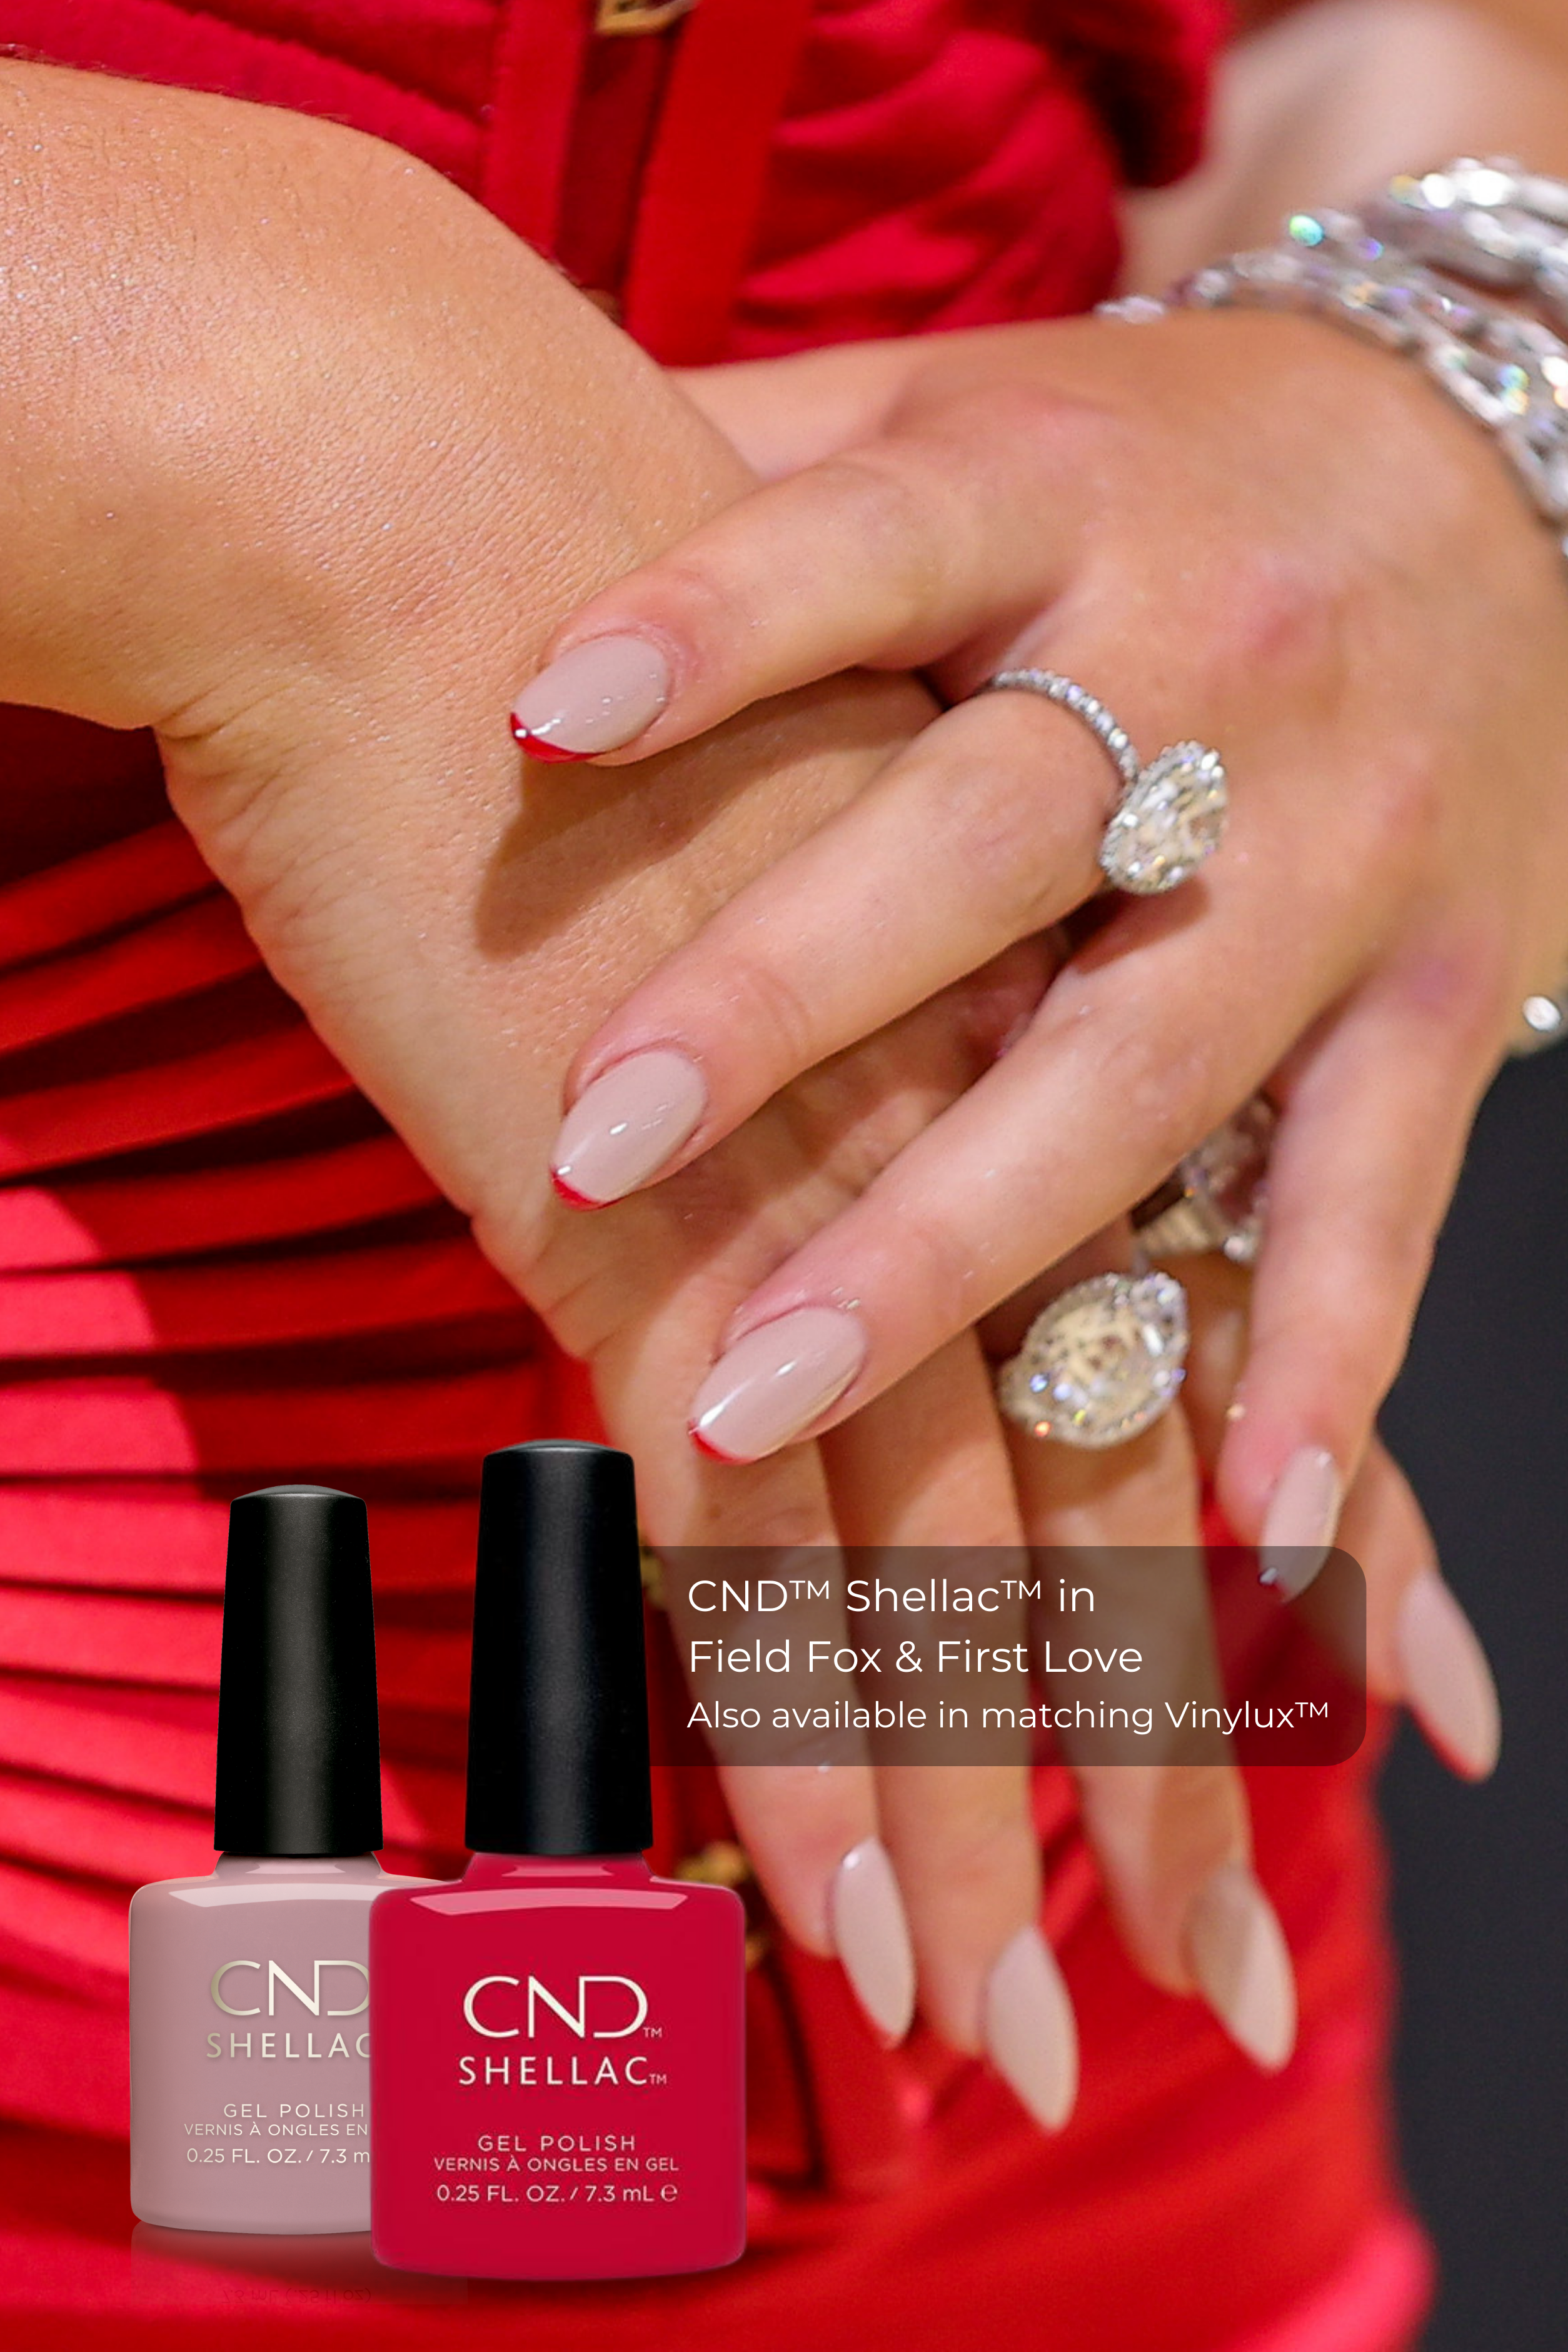 Addison Rae Wears CND Shellac Field Fox and First Love to the Met Gala 2021